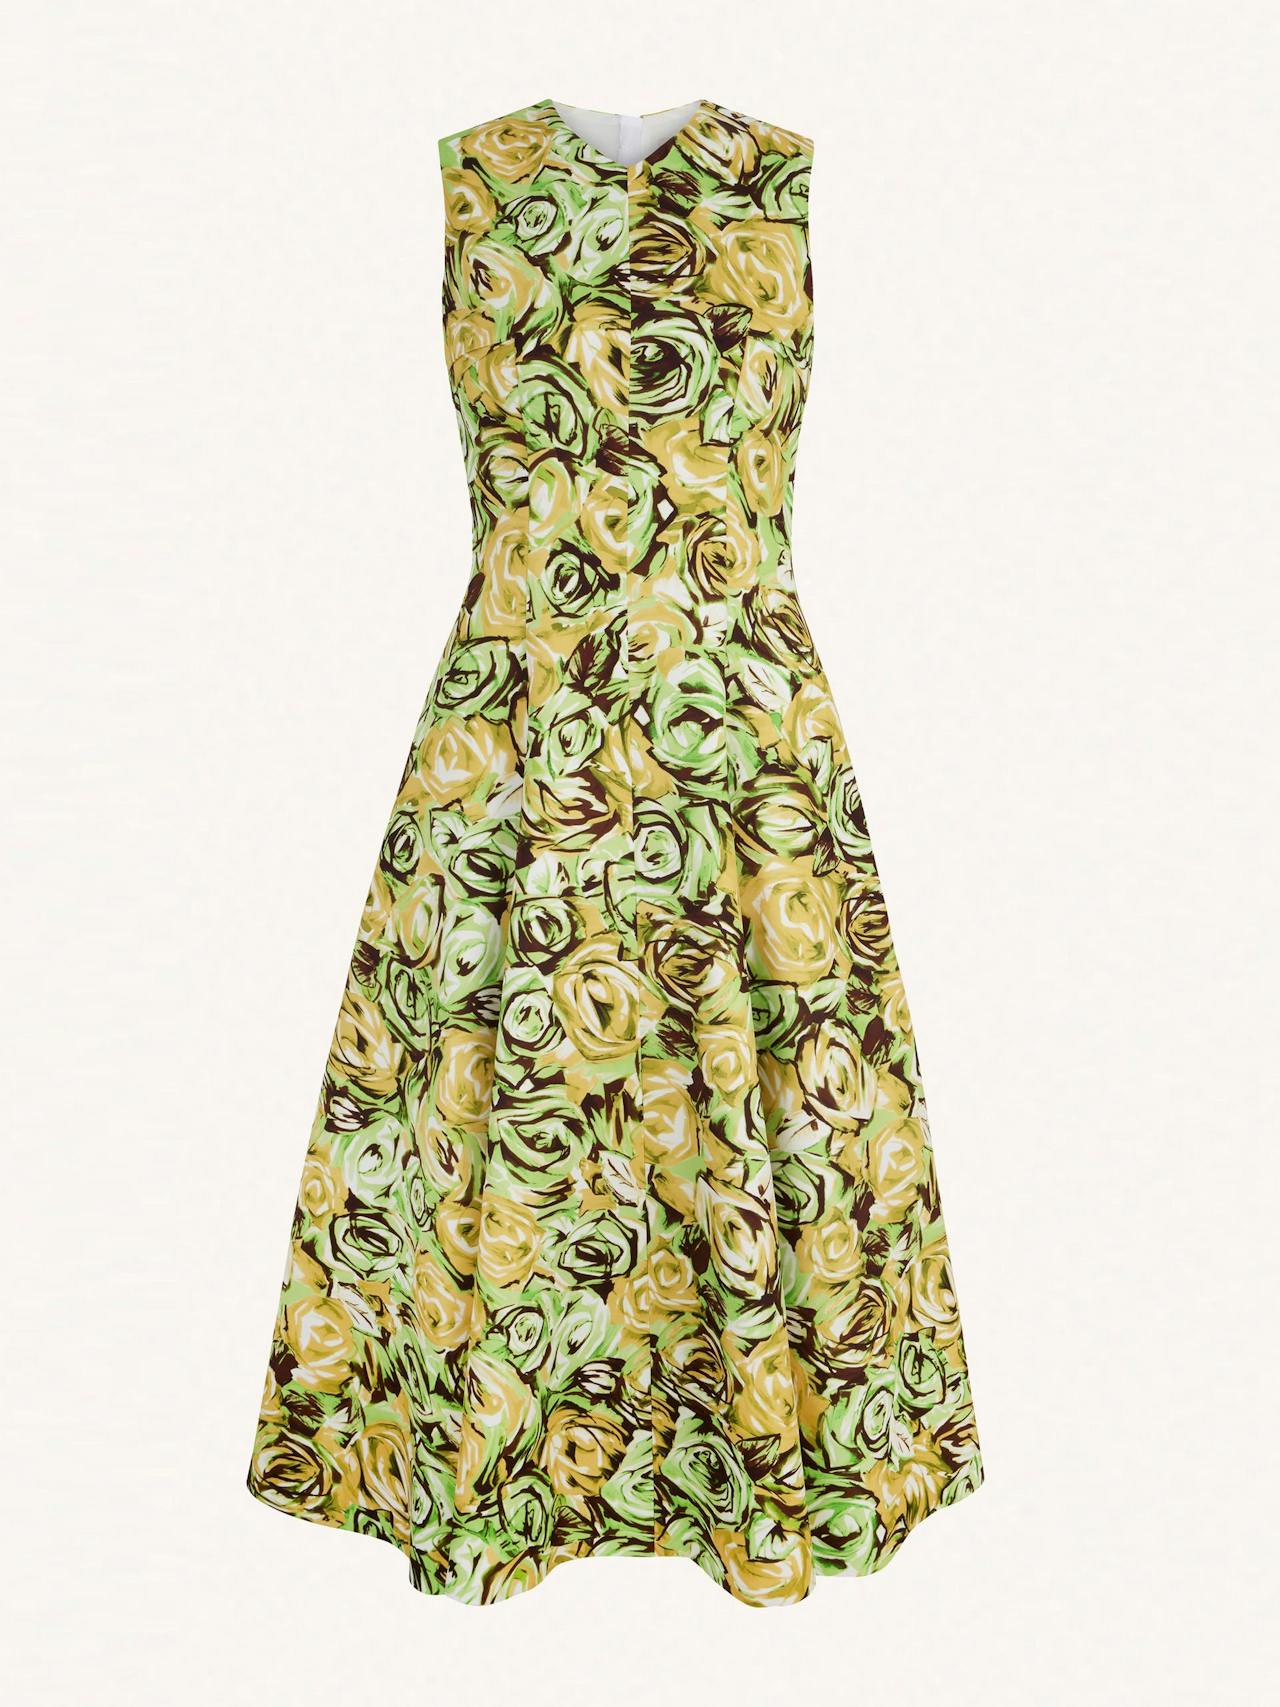 Madi dress in abstract green and lemon rose printed twill